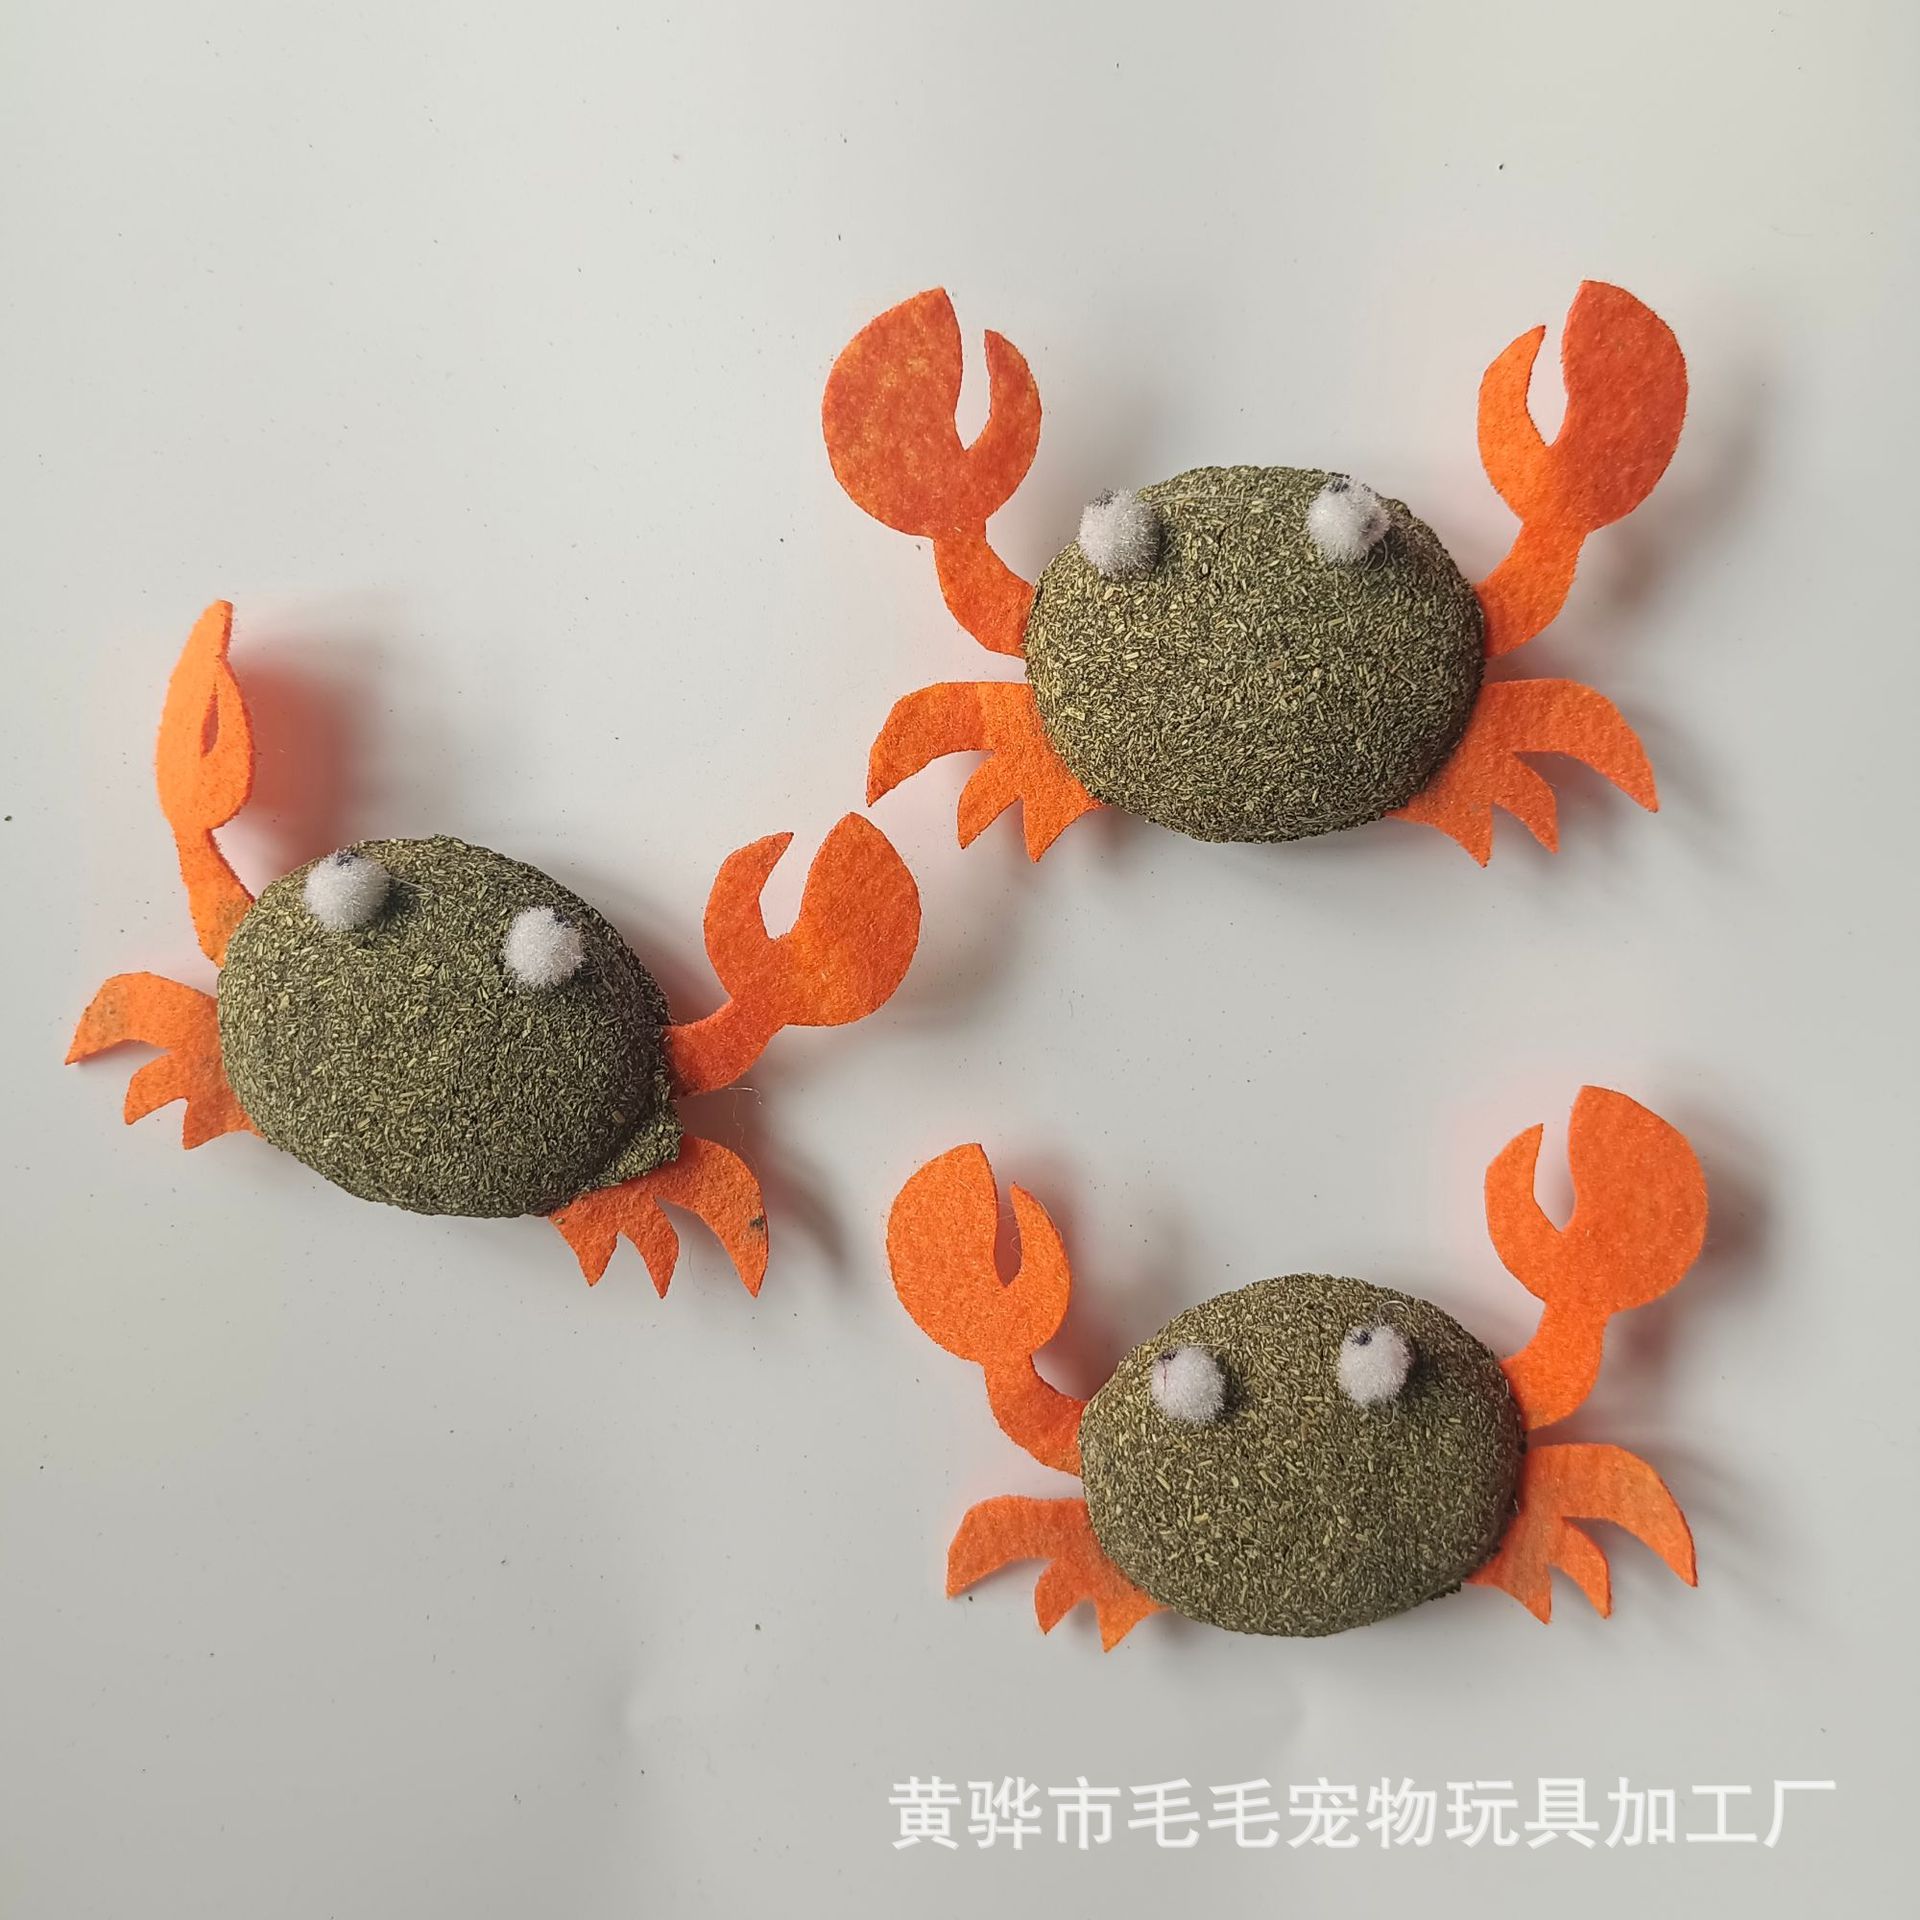 Cute Cat Cat Teaser Catnip Crab Toy Cat Tooth Cleaning Molar Rod Depilation Ball Cat Grass New